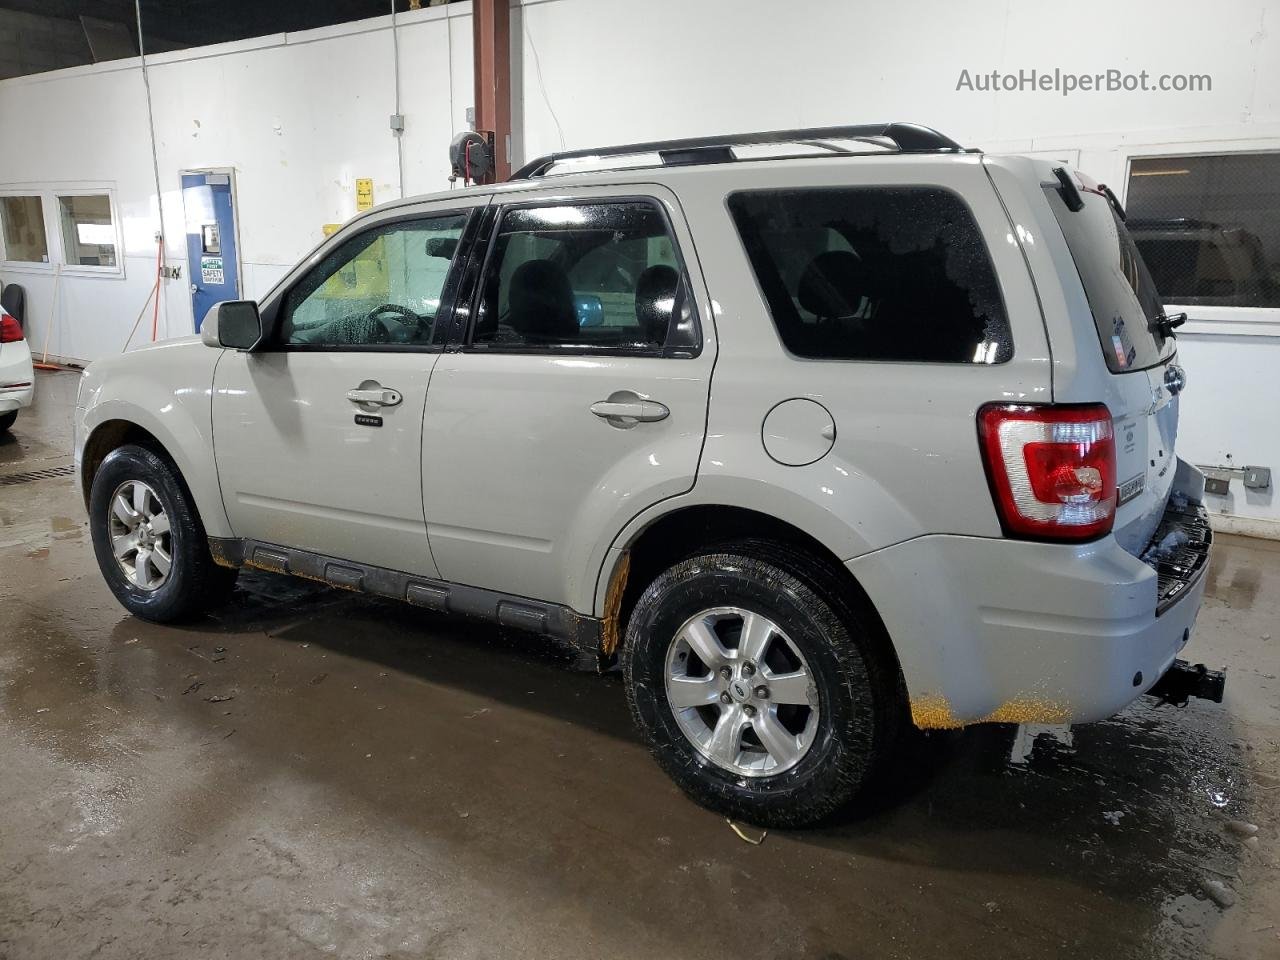 2009 Ford Escape Limited Silver vin: 1FMCU94G99KB13262